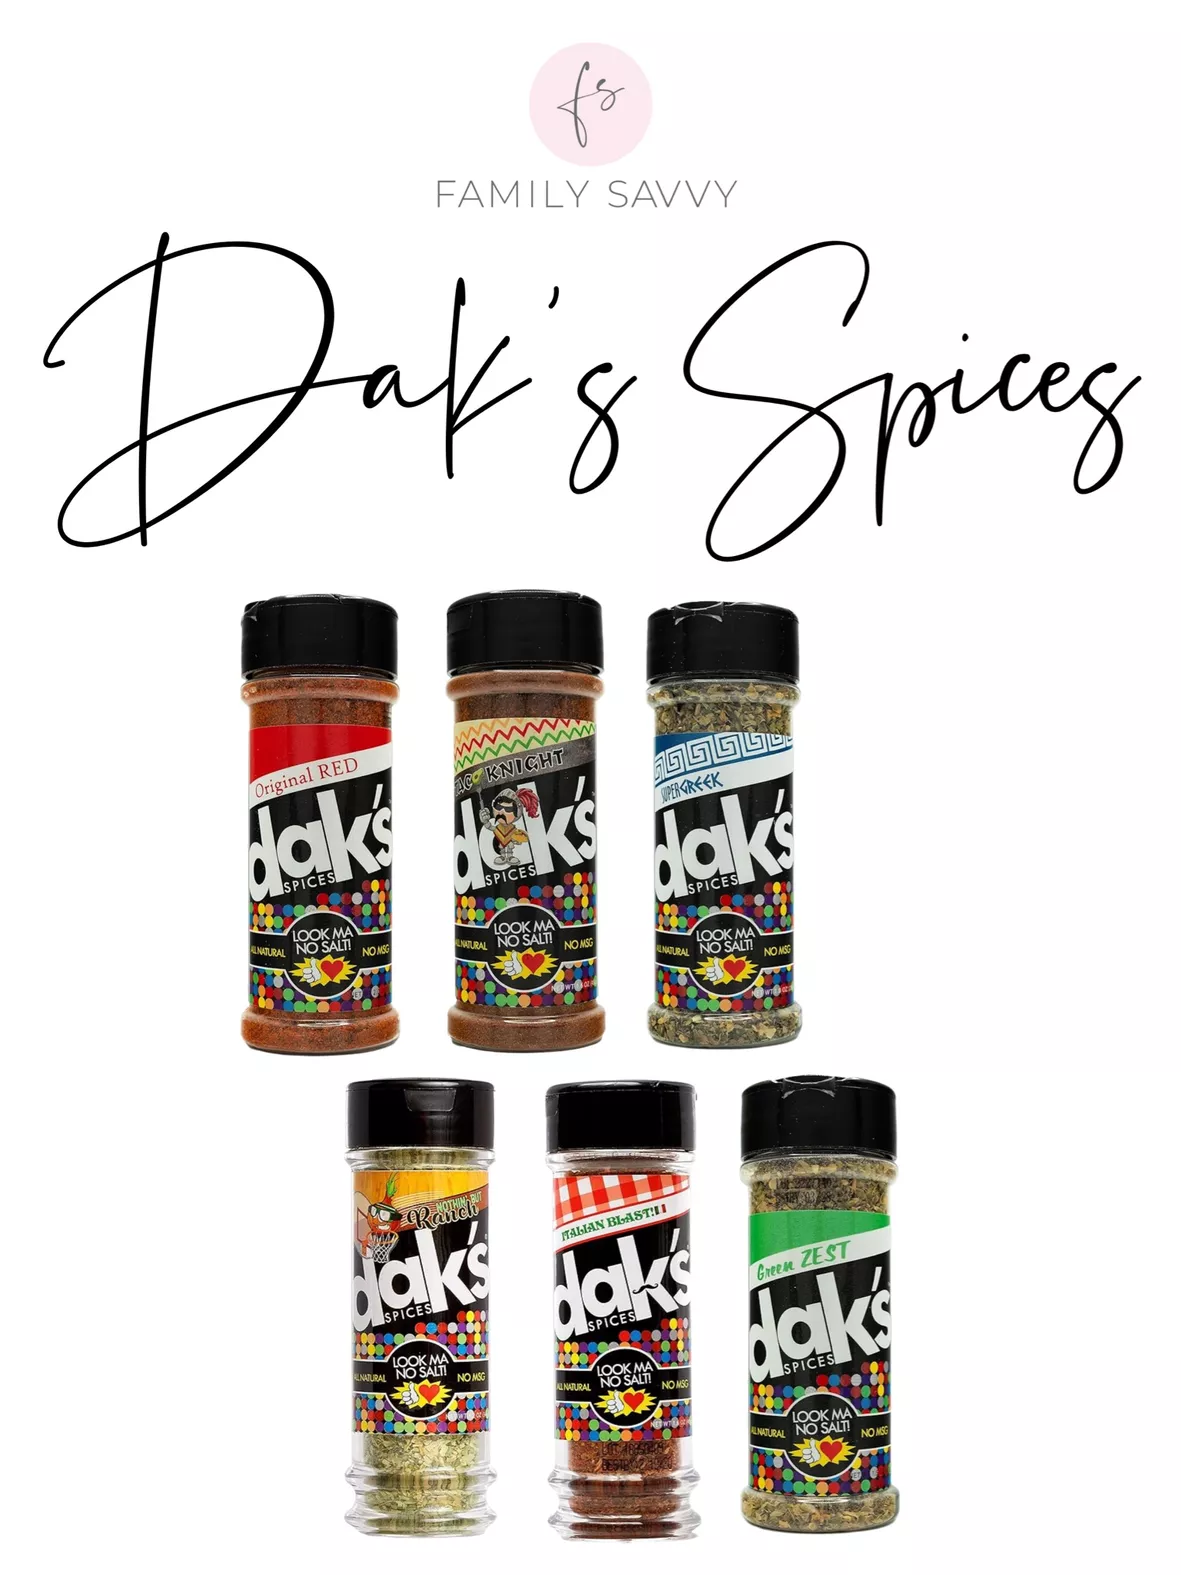 NEW ITEM** DAK'S NOTHIN' BUT RANCH- SALT FREE seasoning to enhance any meal